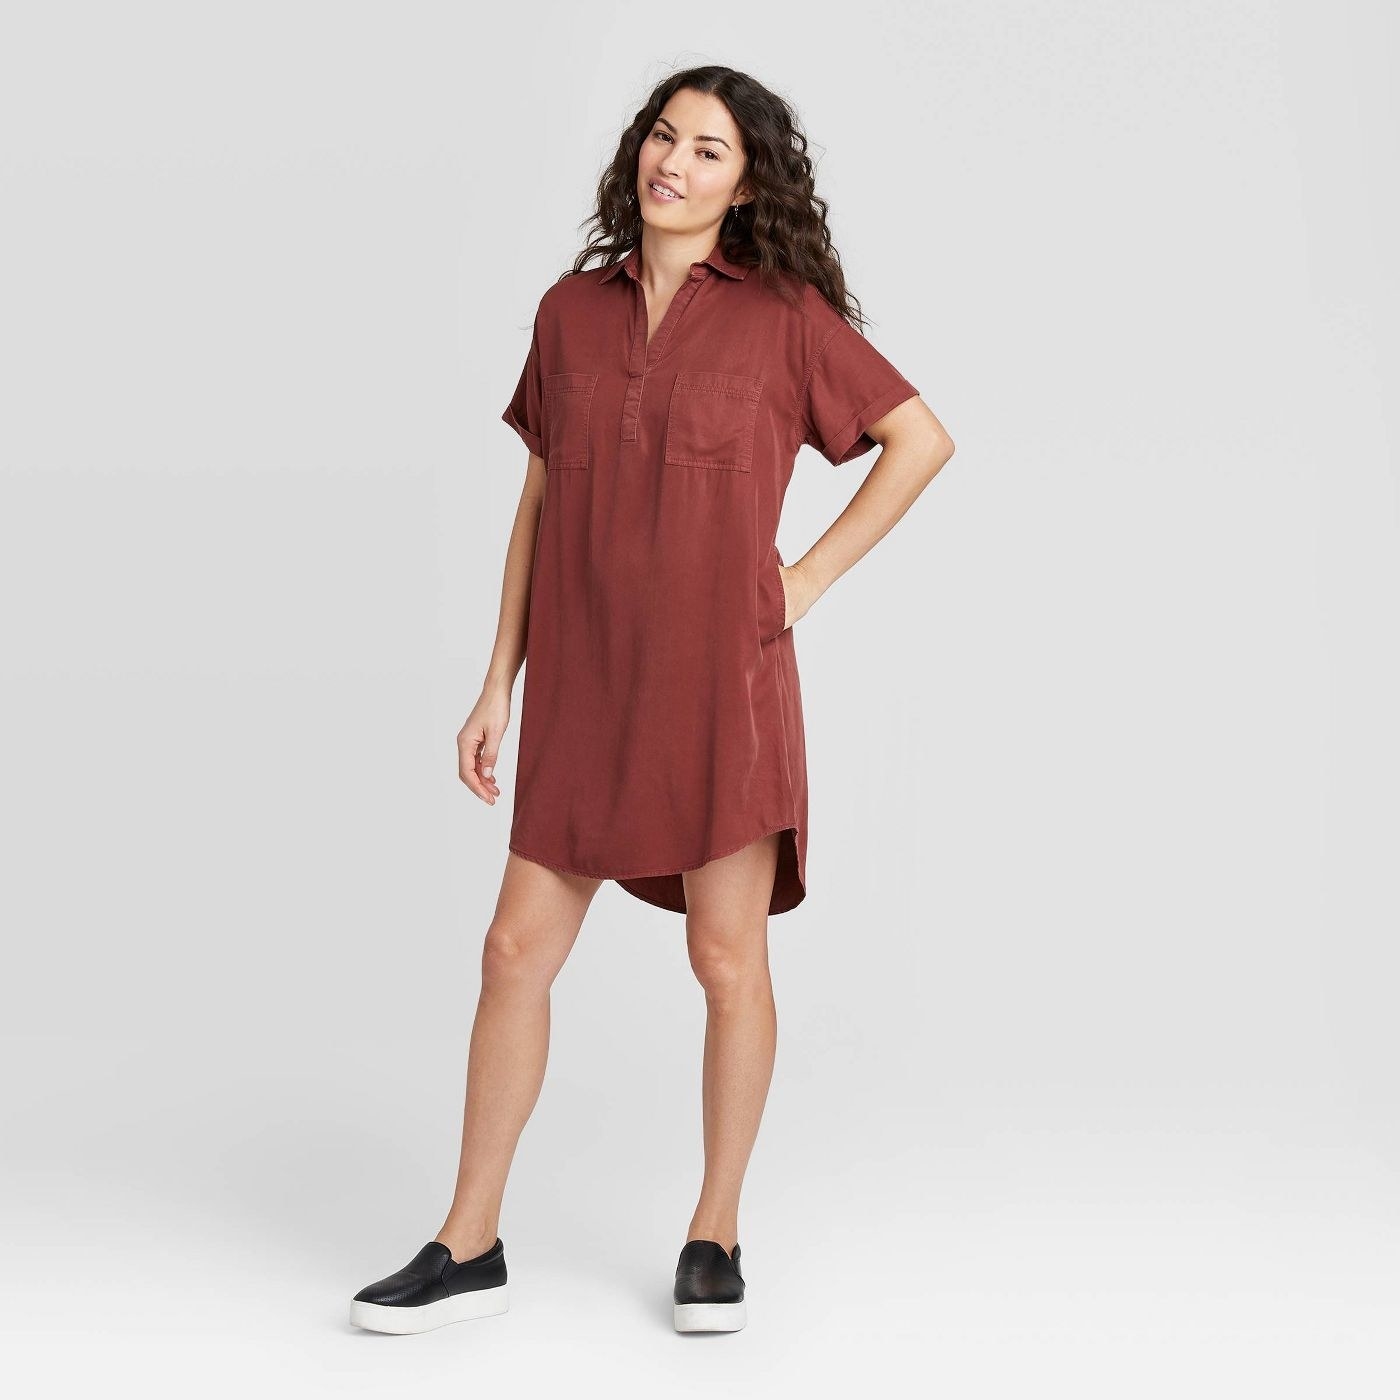 Model in a dark red short sleeved dress that falls at the knees 